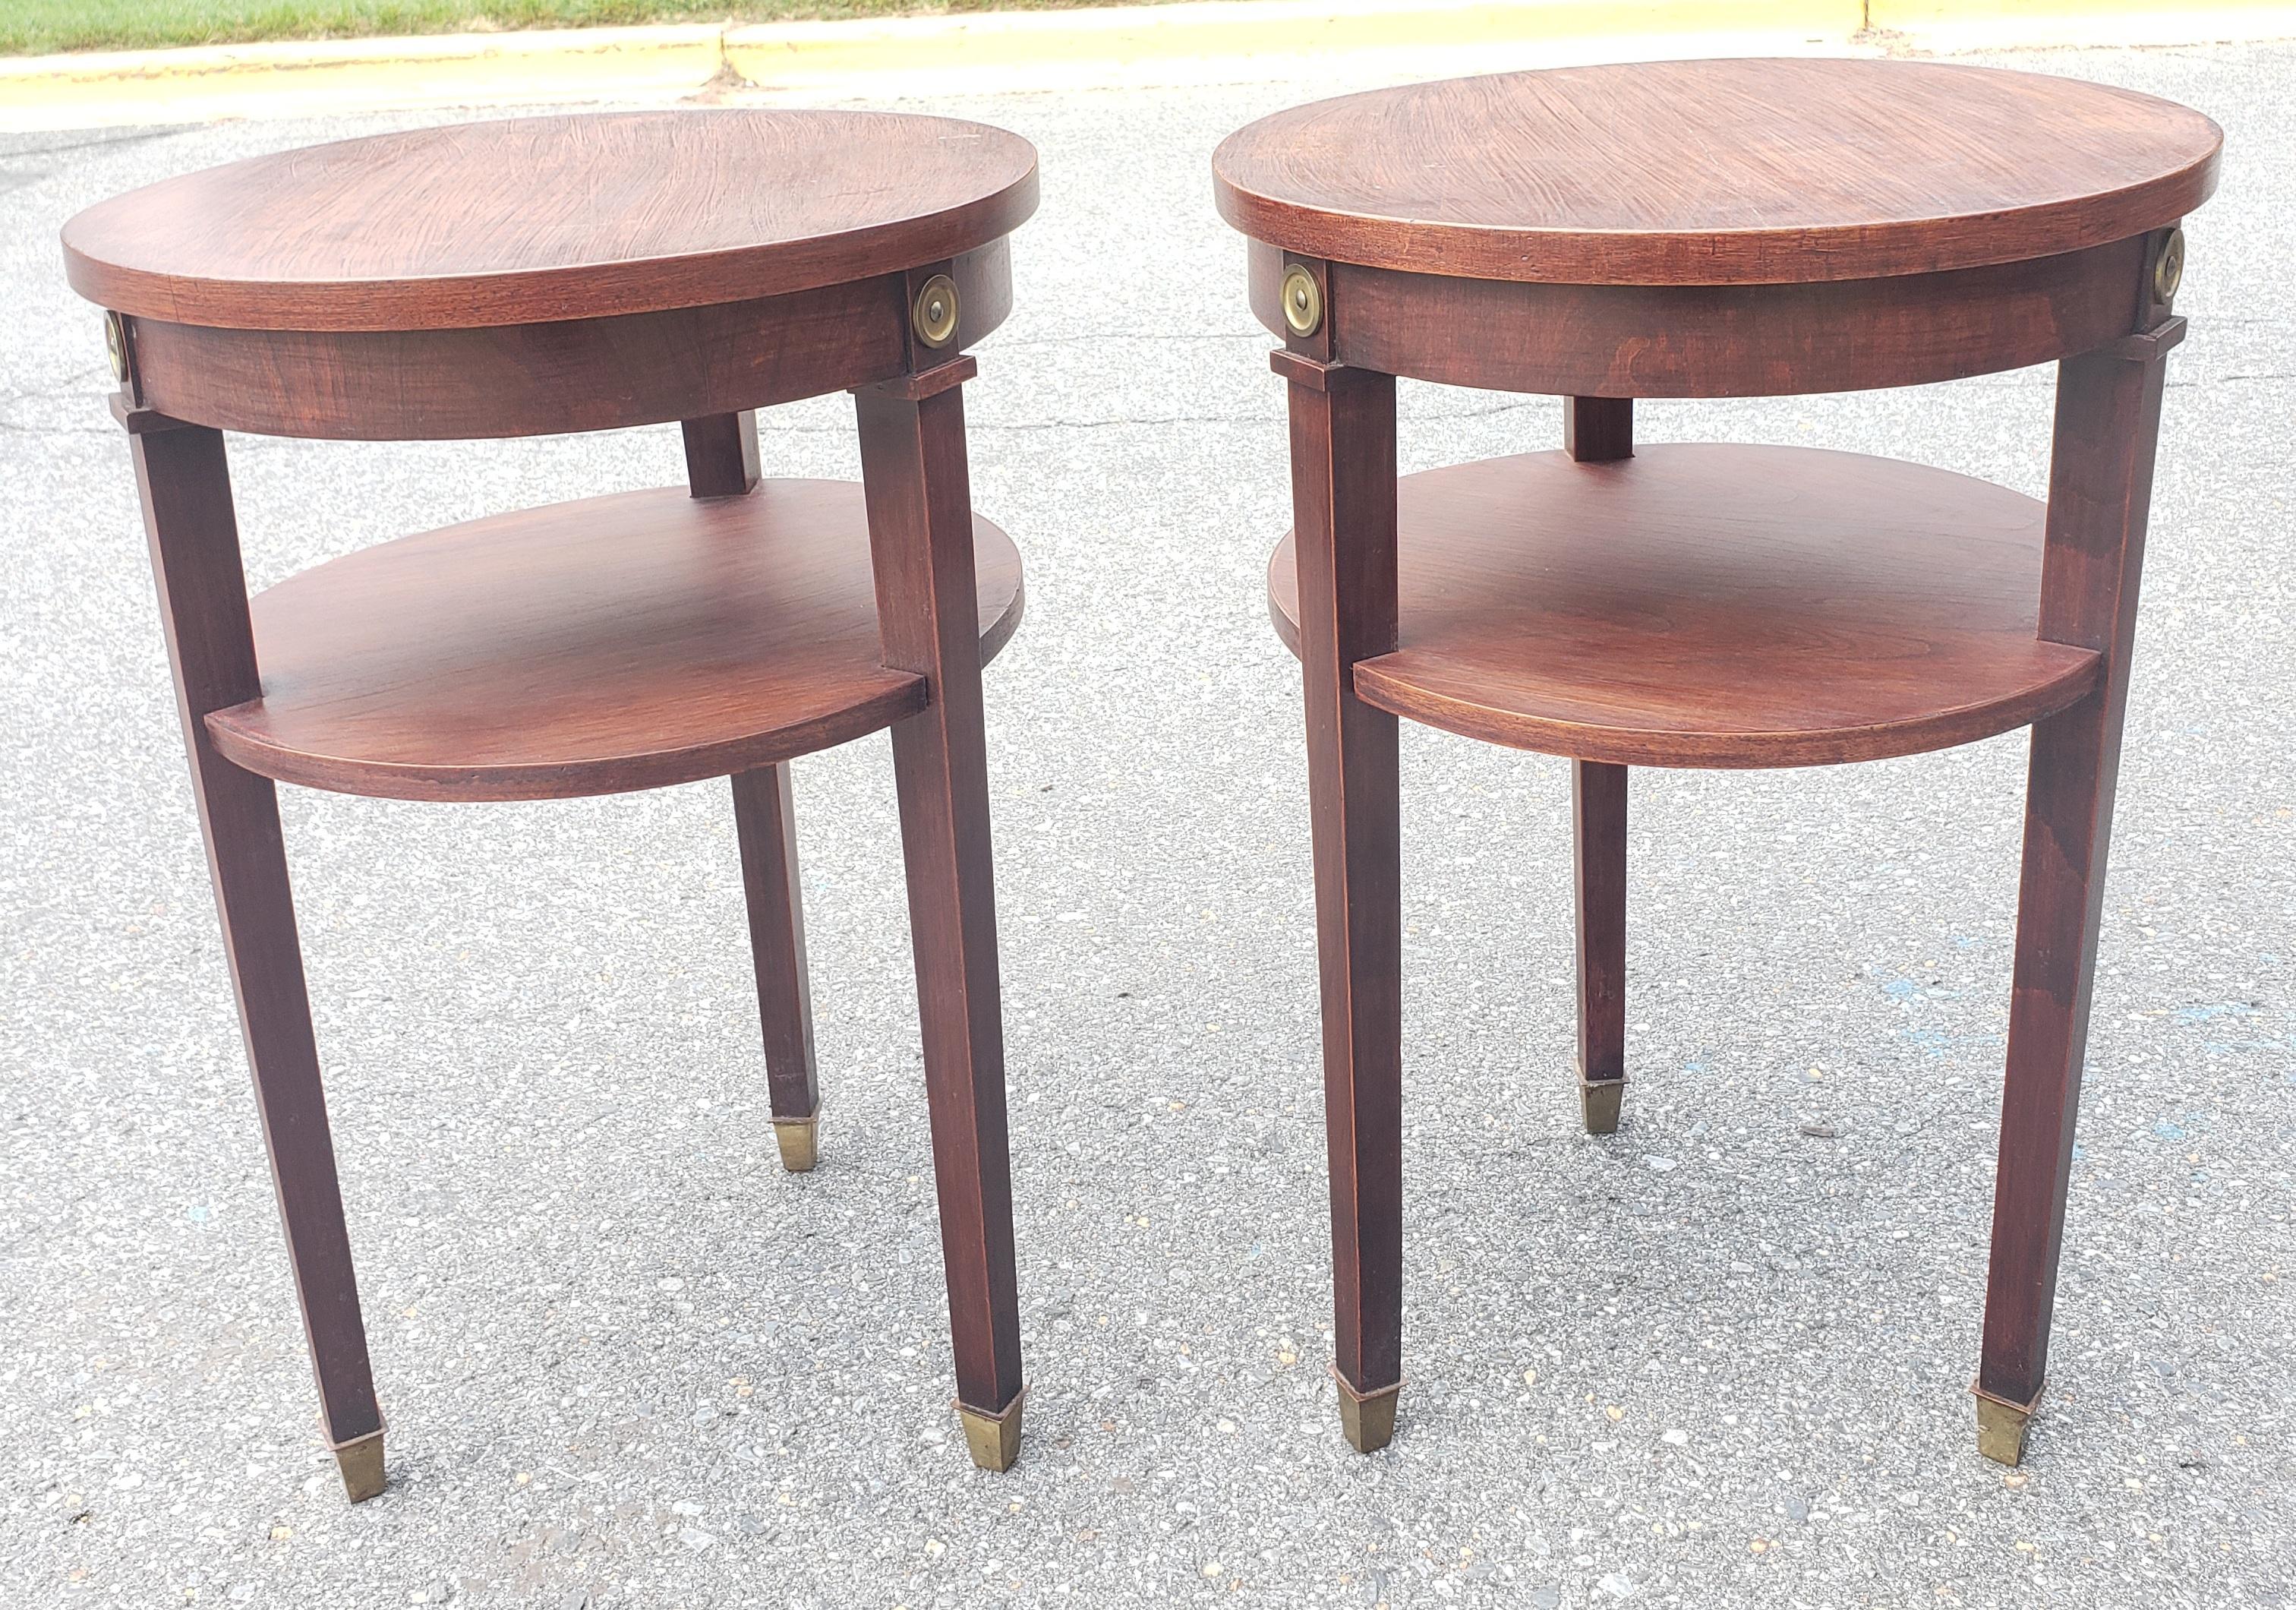 1950s Refinished Mahogany 2-Tier Round Candle Stand with Brass Capped Legs, Pair For Sale 2